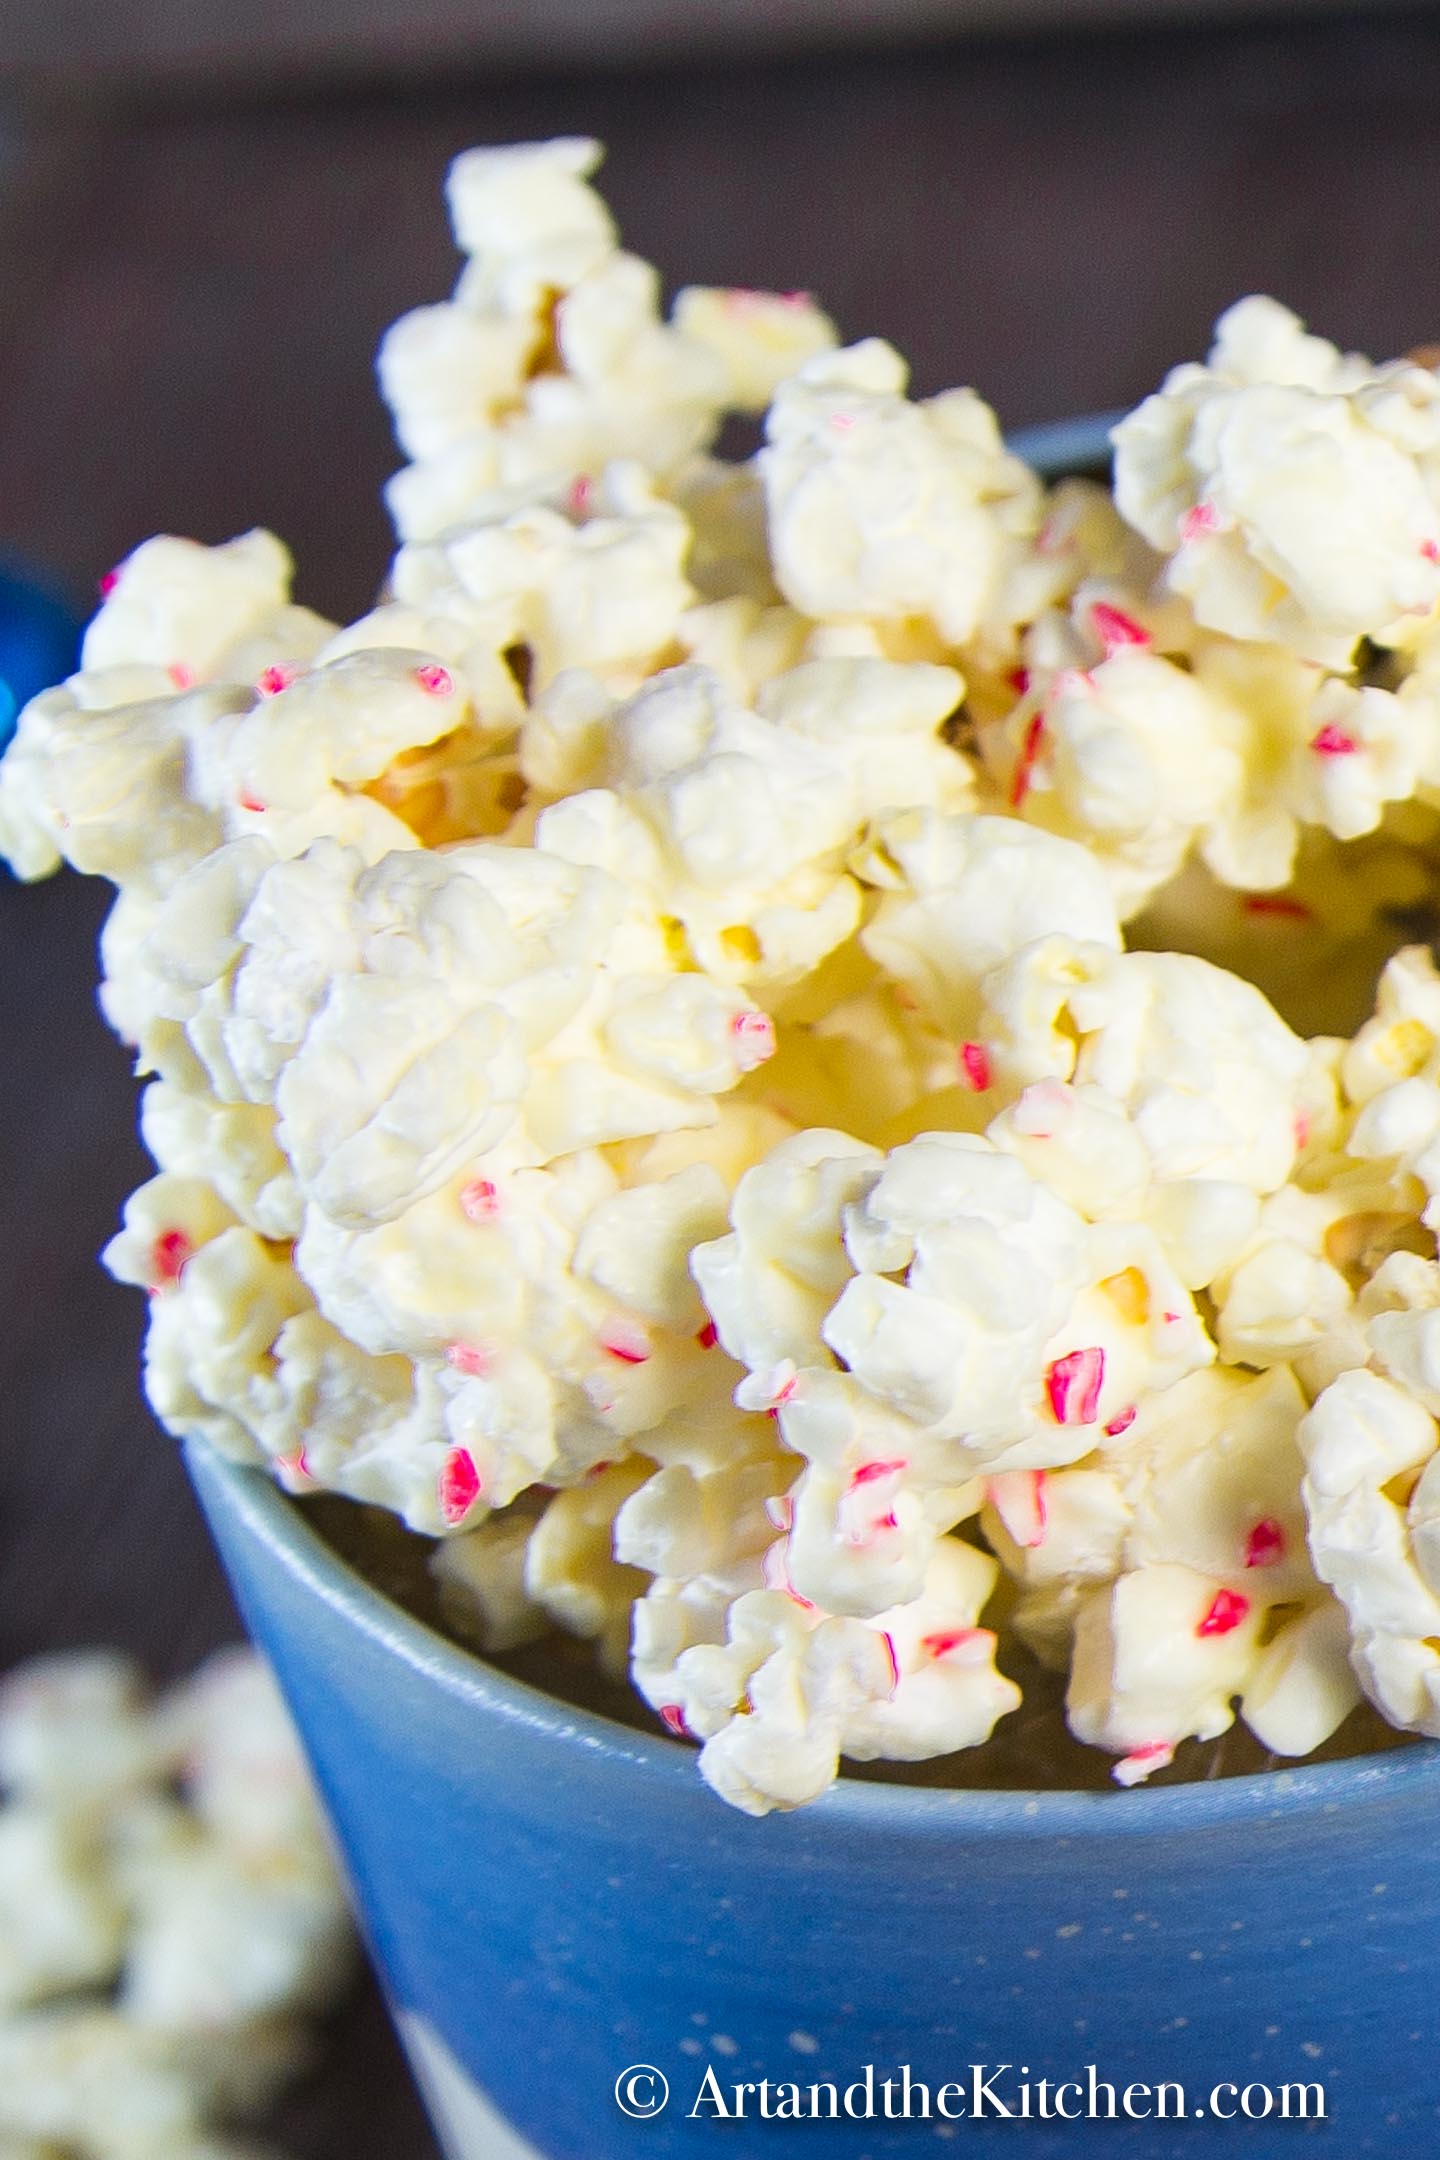 Decorative Holiday container filled with popcorn coated in white chocolate and pieces of candy cane.